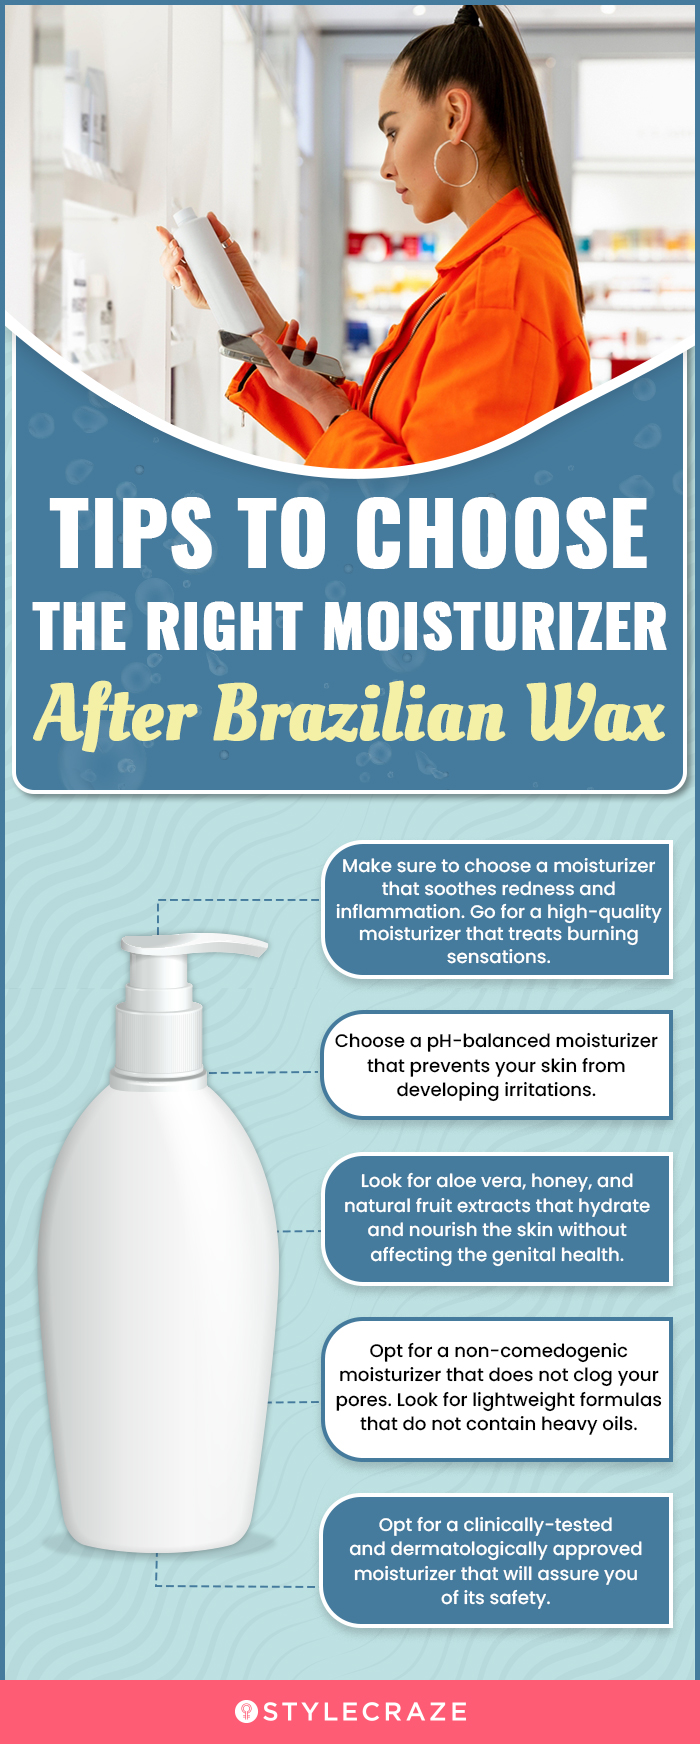 Tips To Choose The Right Moisturizer After Brazilian Wax  [infographic]